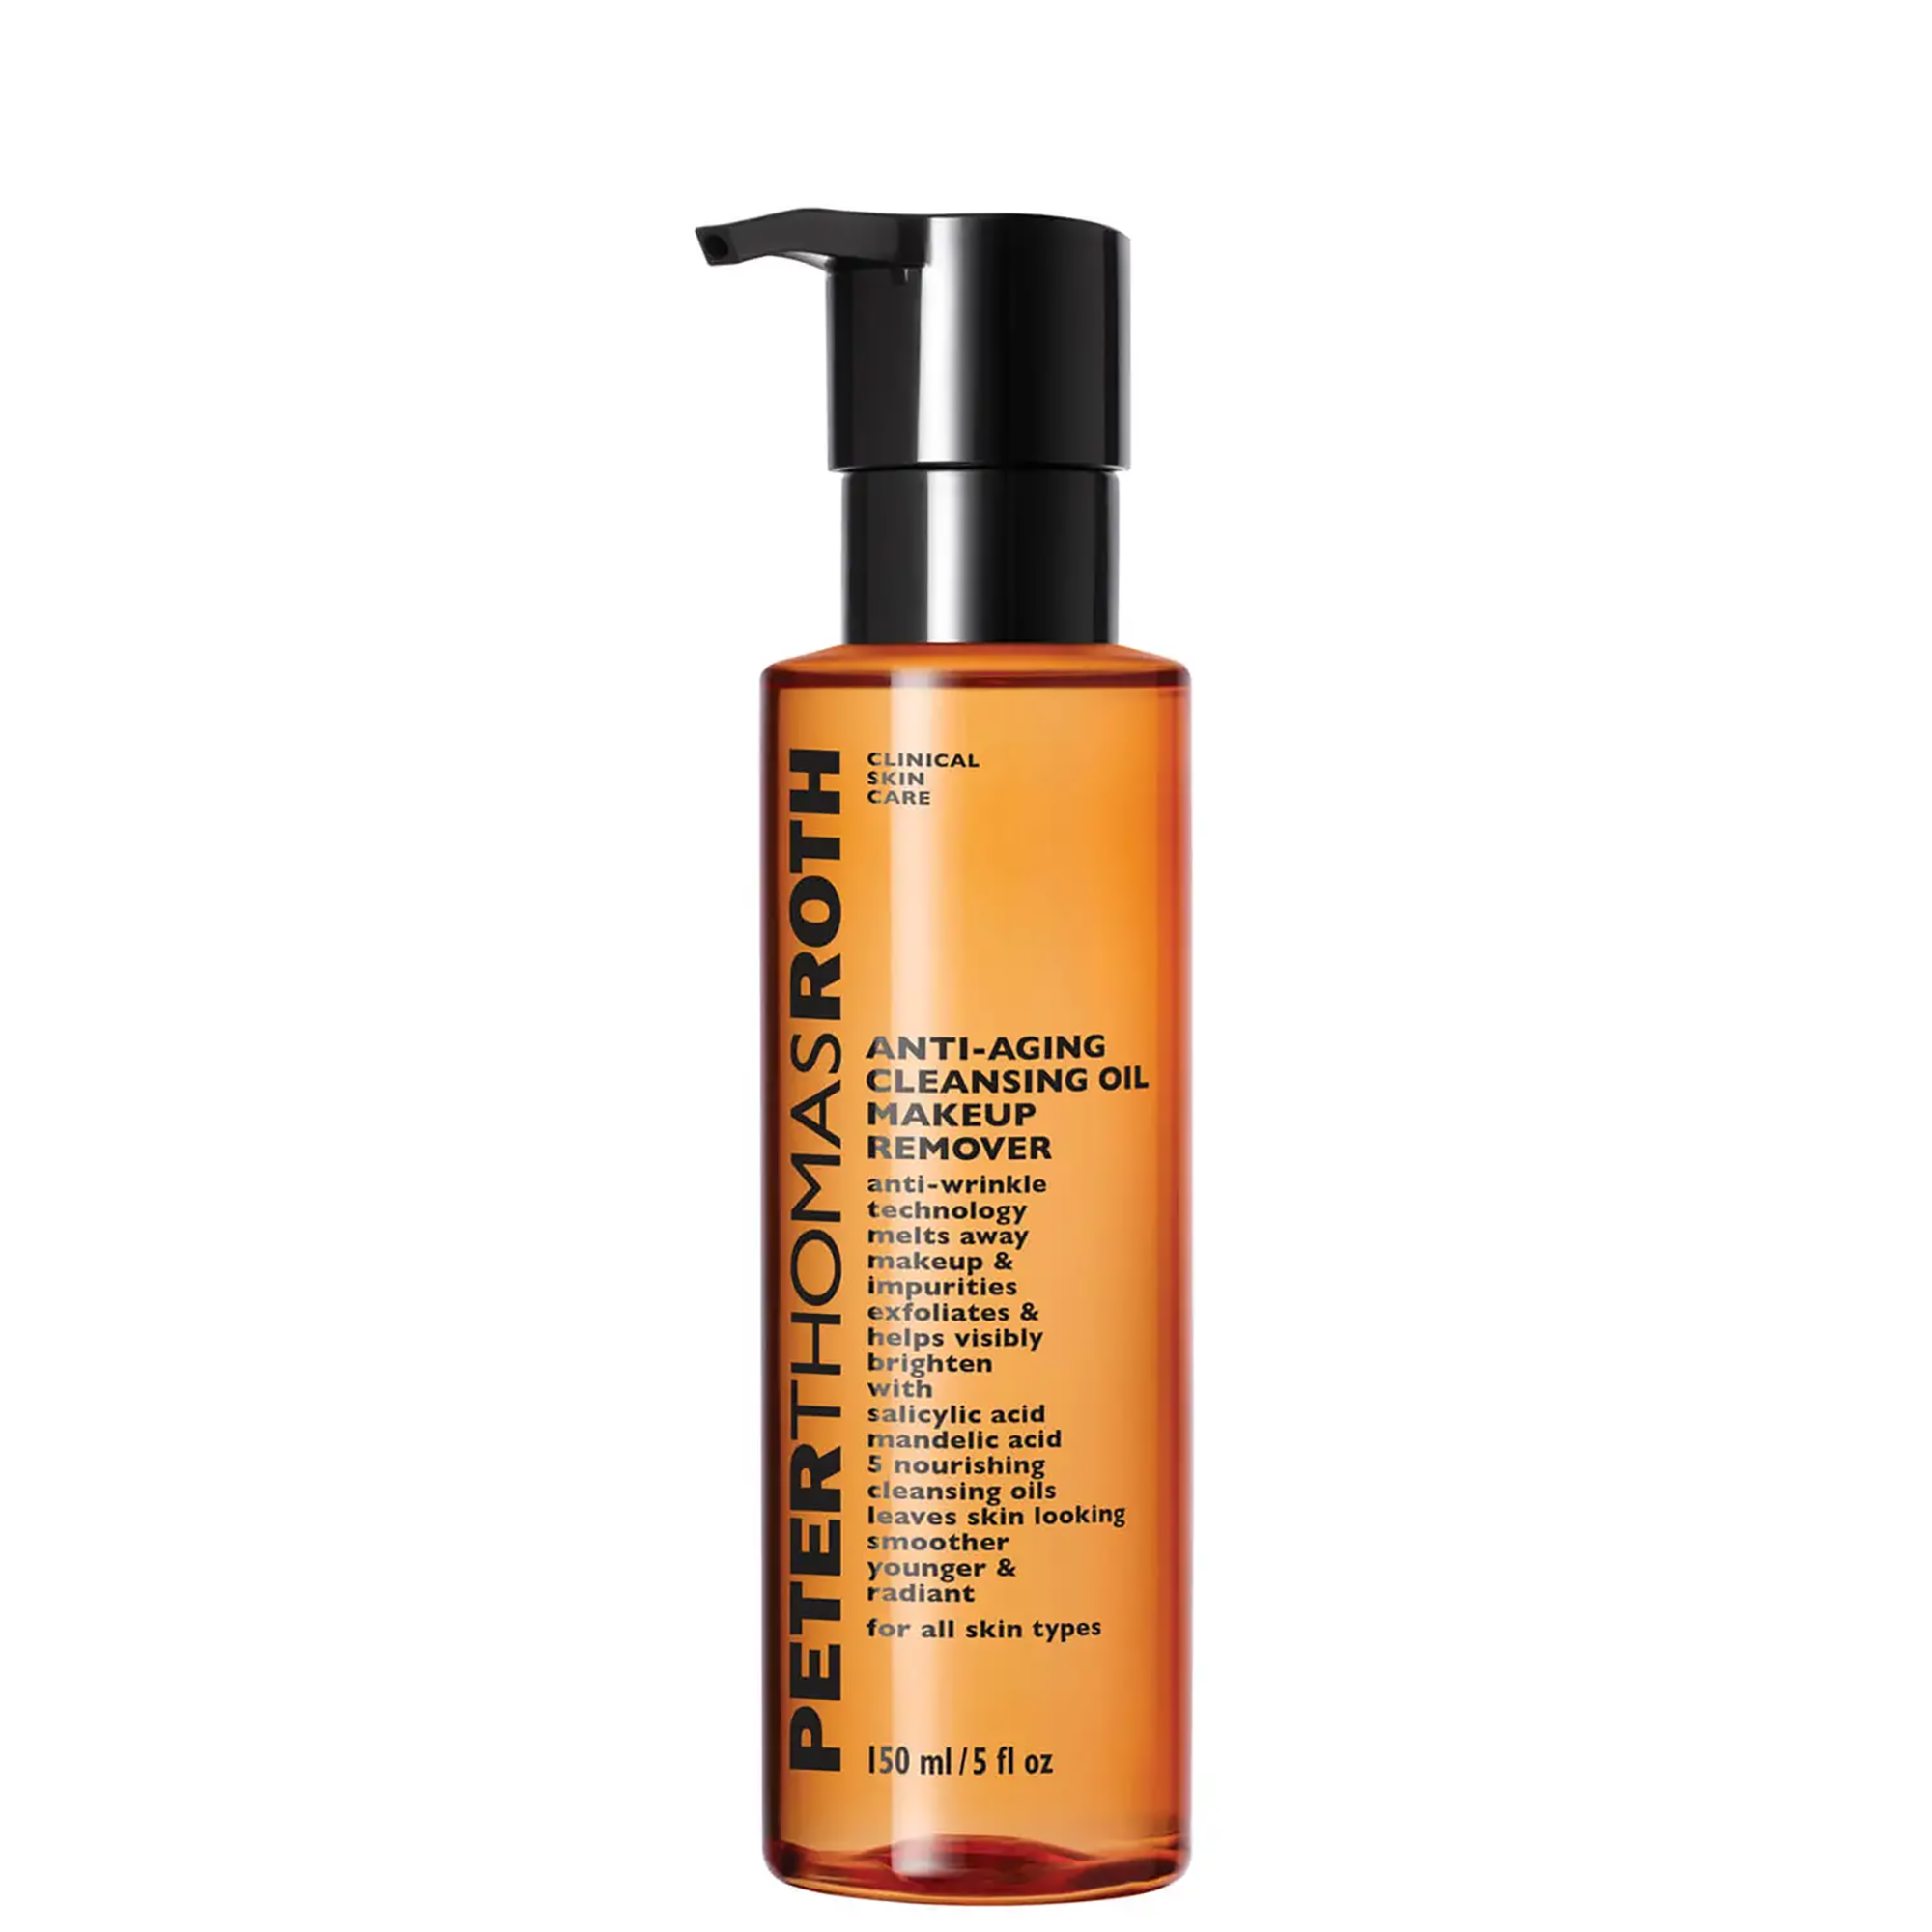 Peter Thomas Roth Anti-Aging Cleansing Oil Makeup Remover / 5 OZ